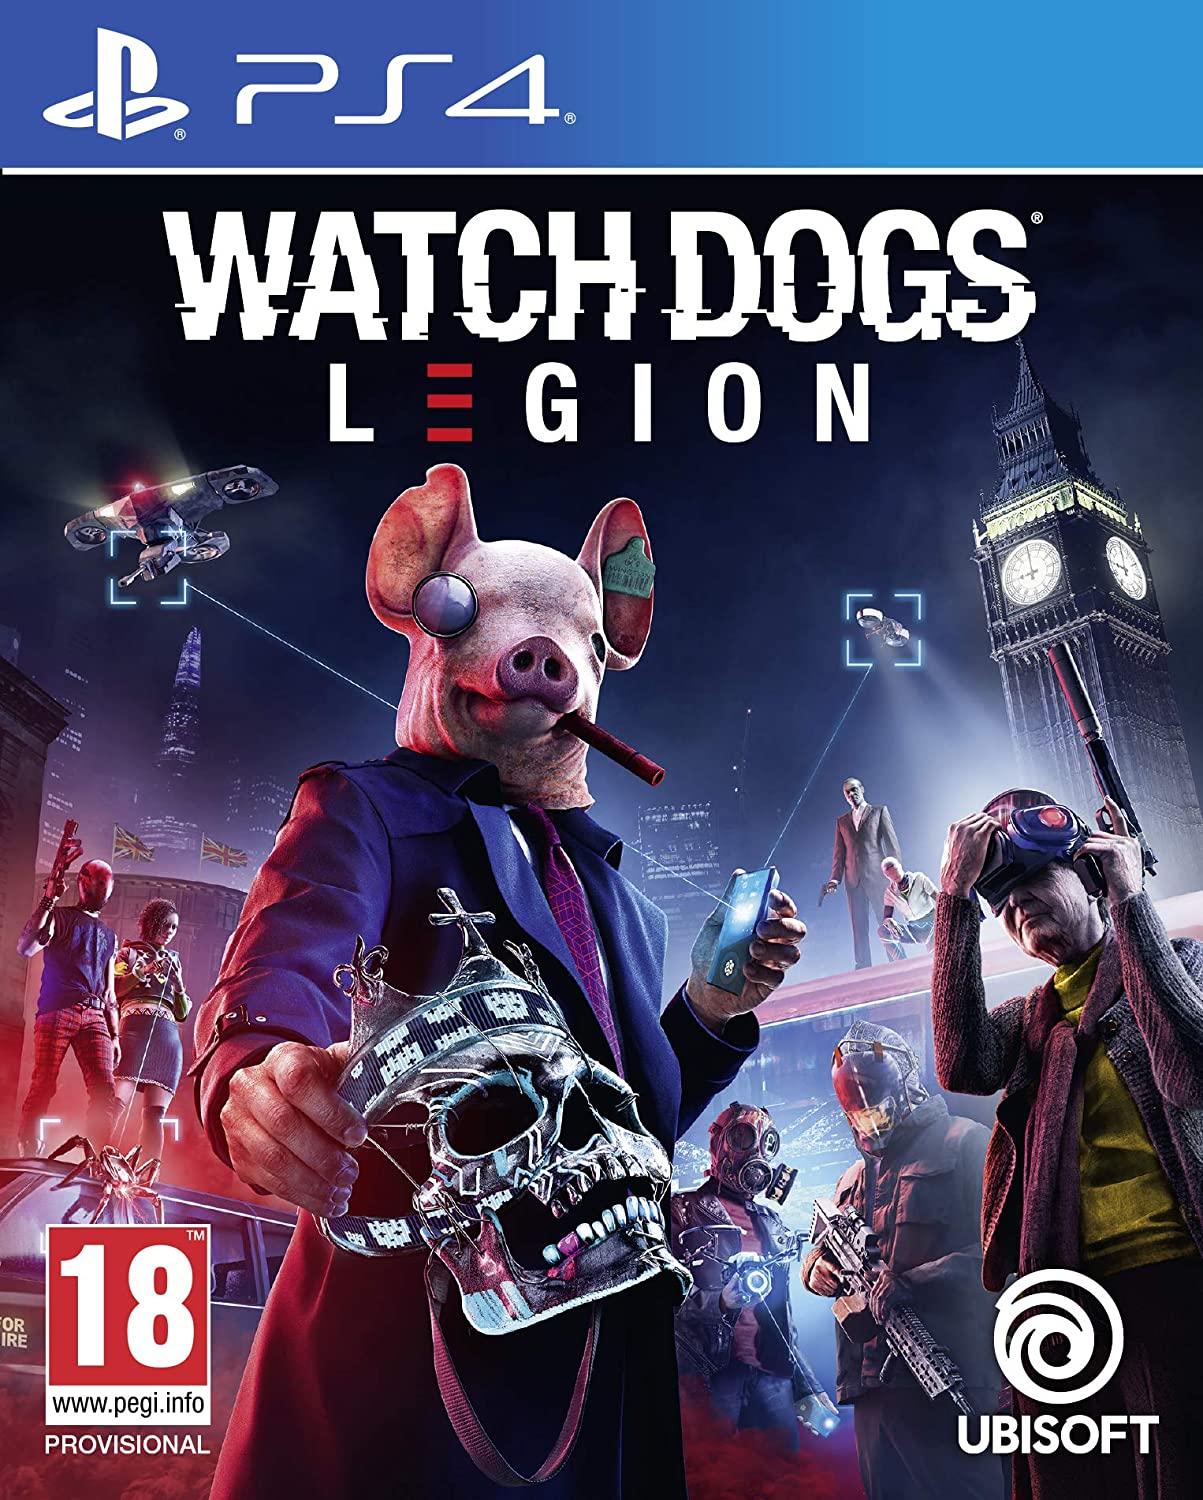 Ubisoft used the extra time to refine Watch Dogs Legion's biggest